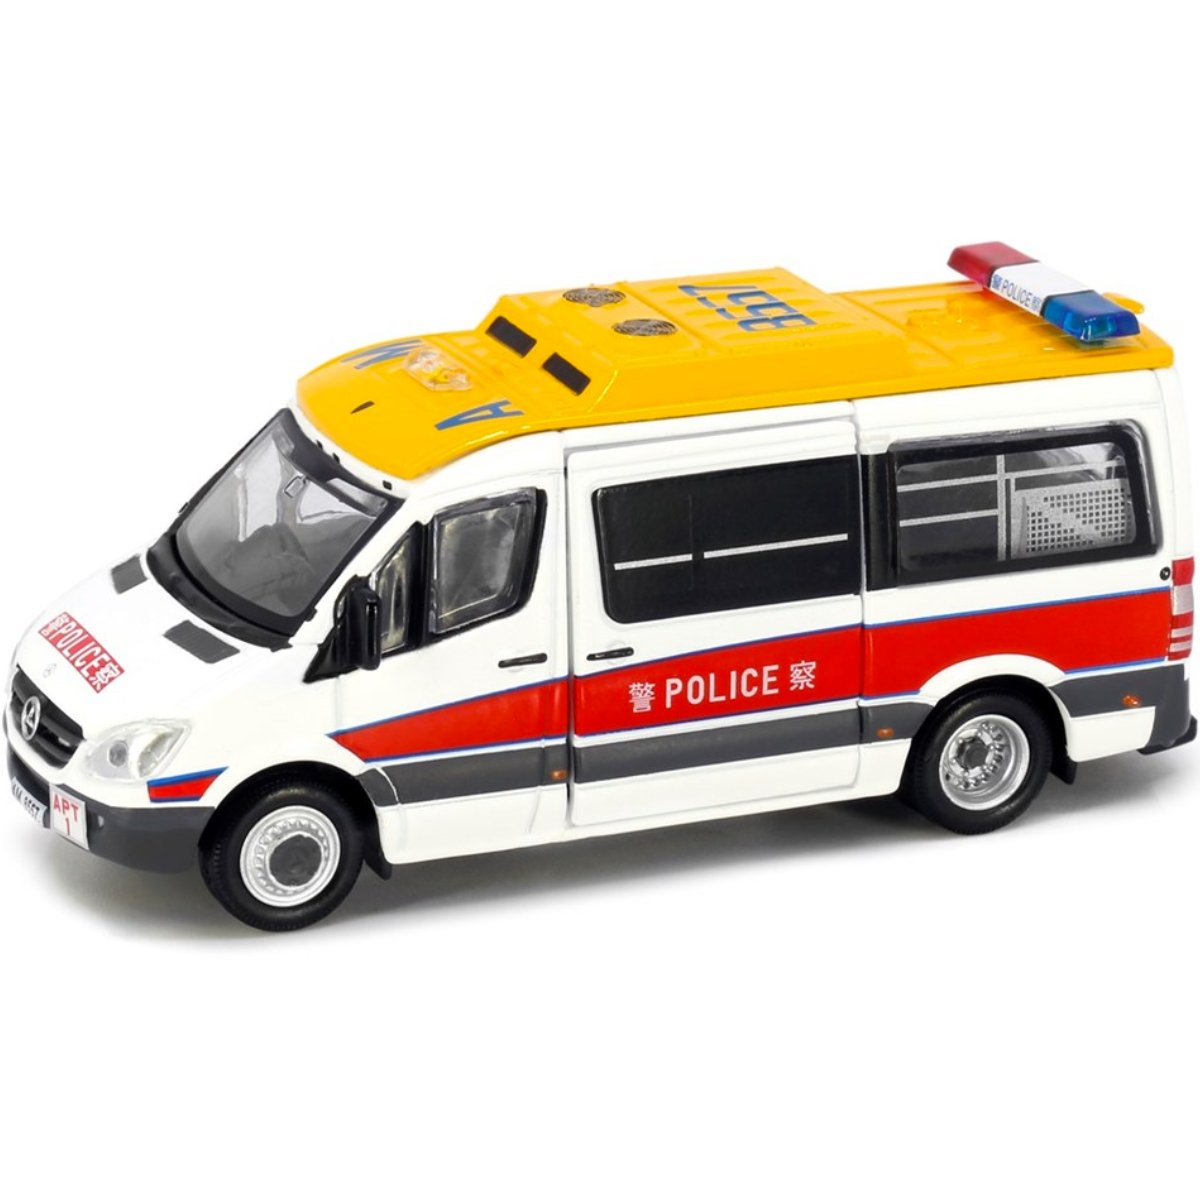 Tiny Models Mercedes-Benz Sprinter Hong Kong Police - Airport District (1:76 Scale) - Phillips Hobbies